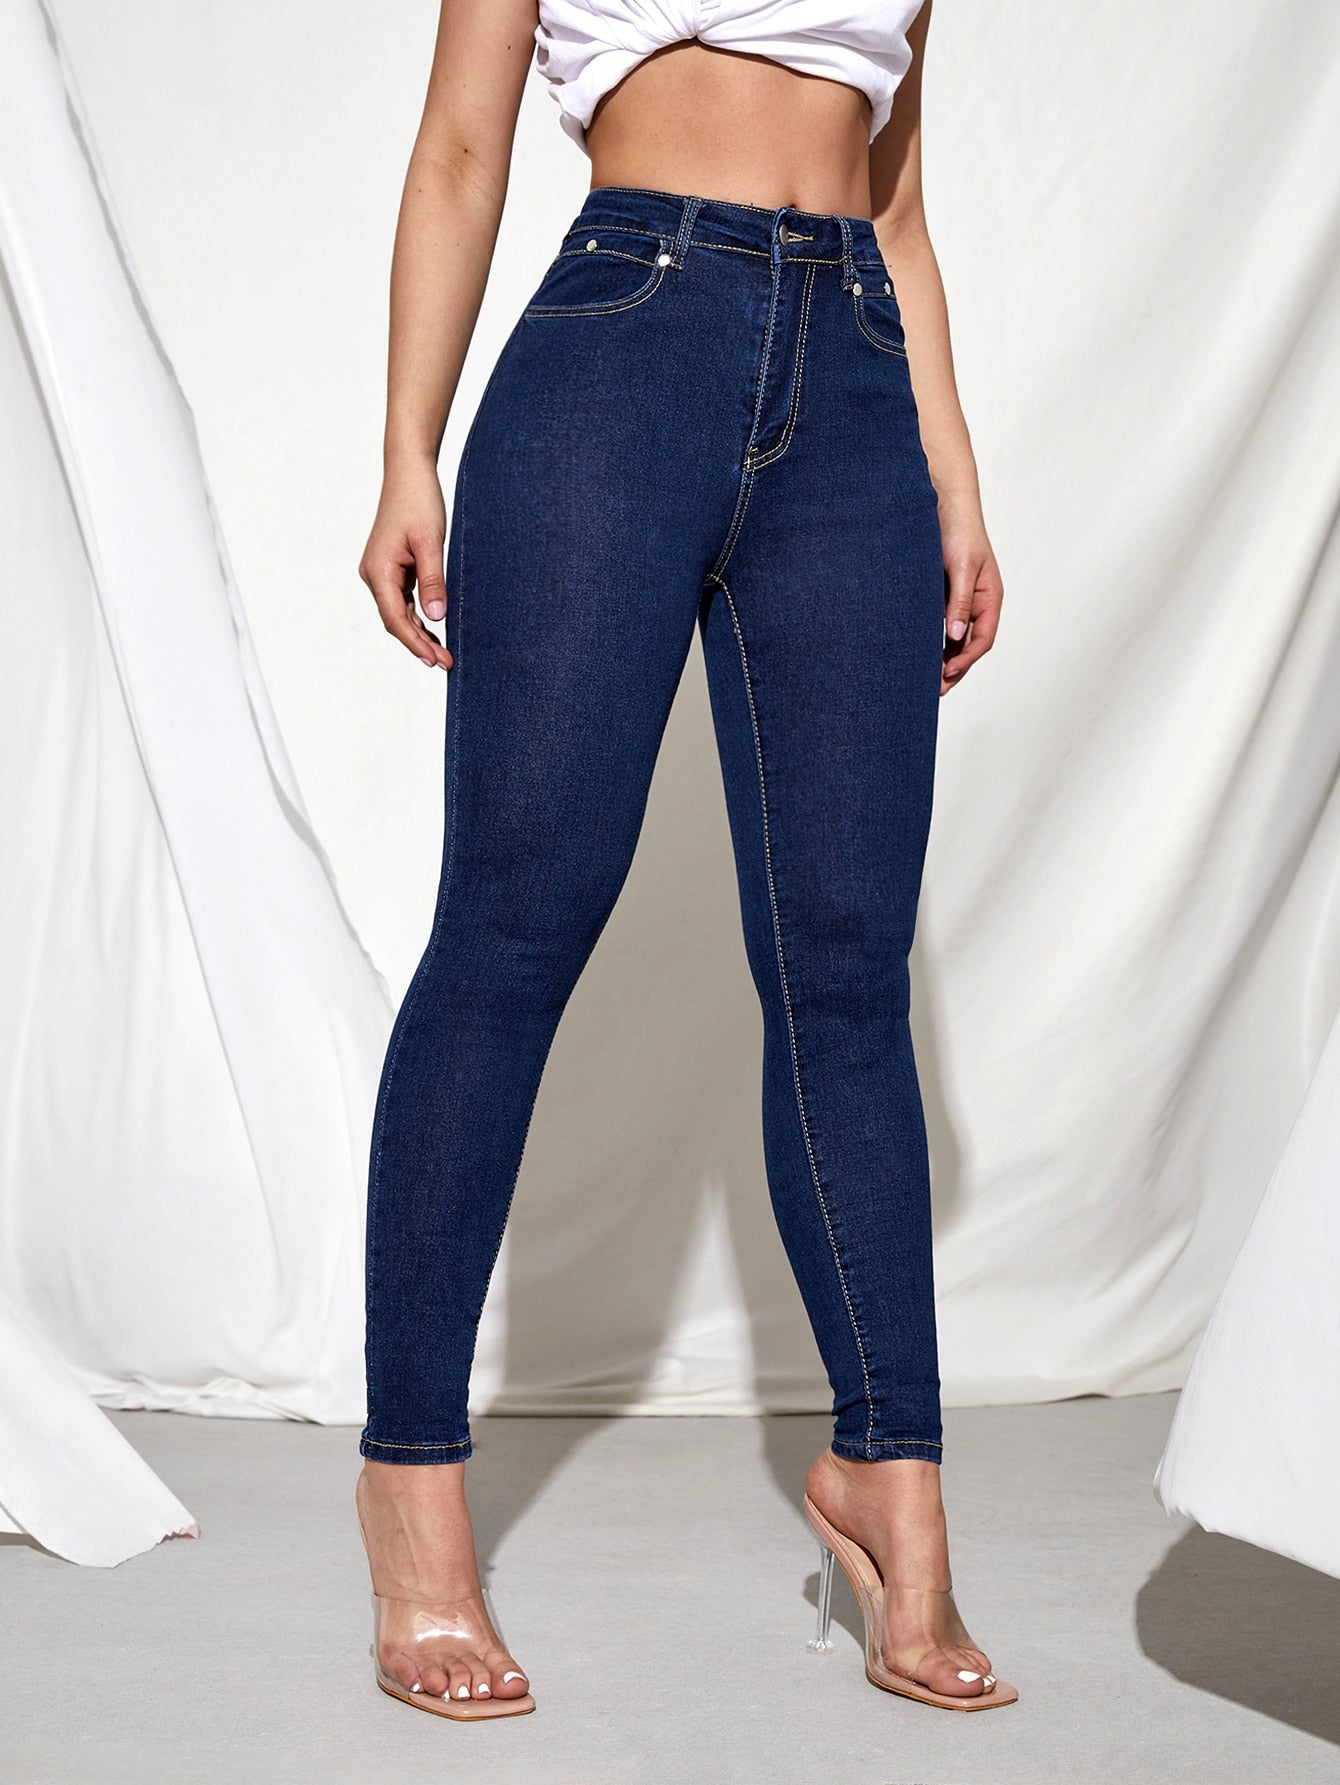 High Waisted Zip Up Skinny Jeans – Funky Monkey